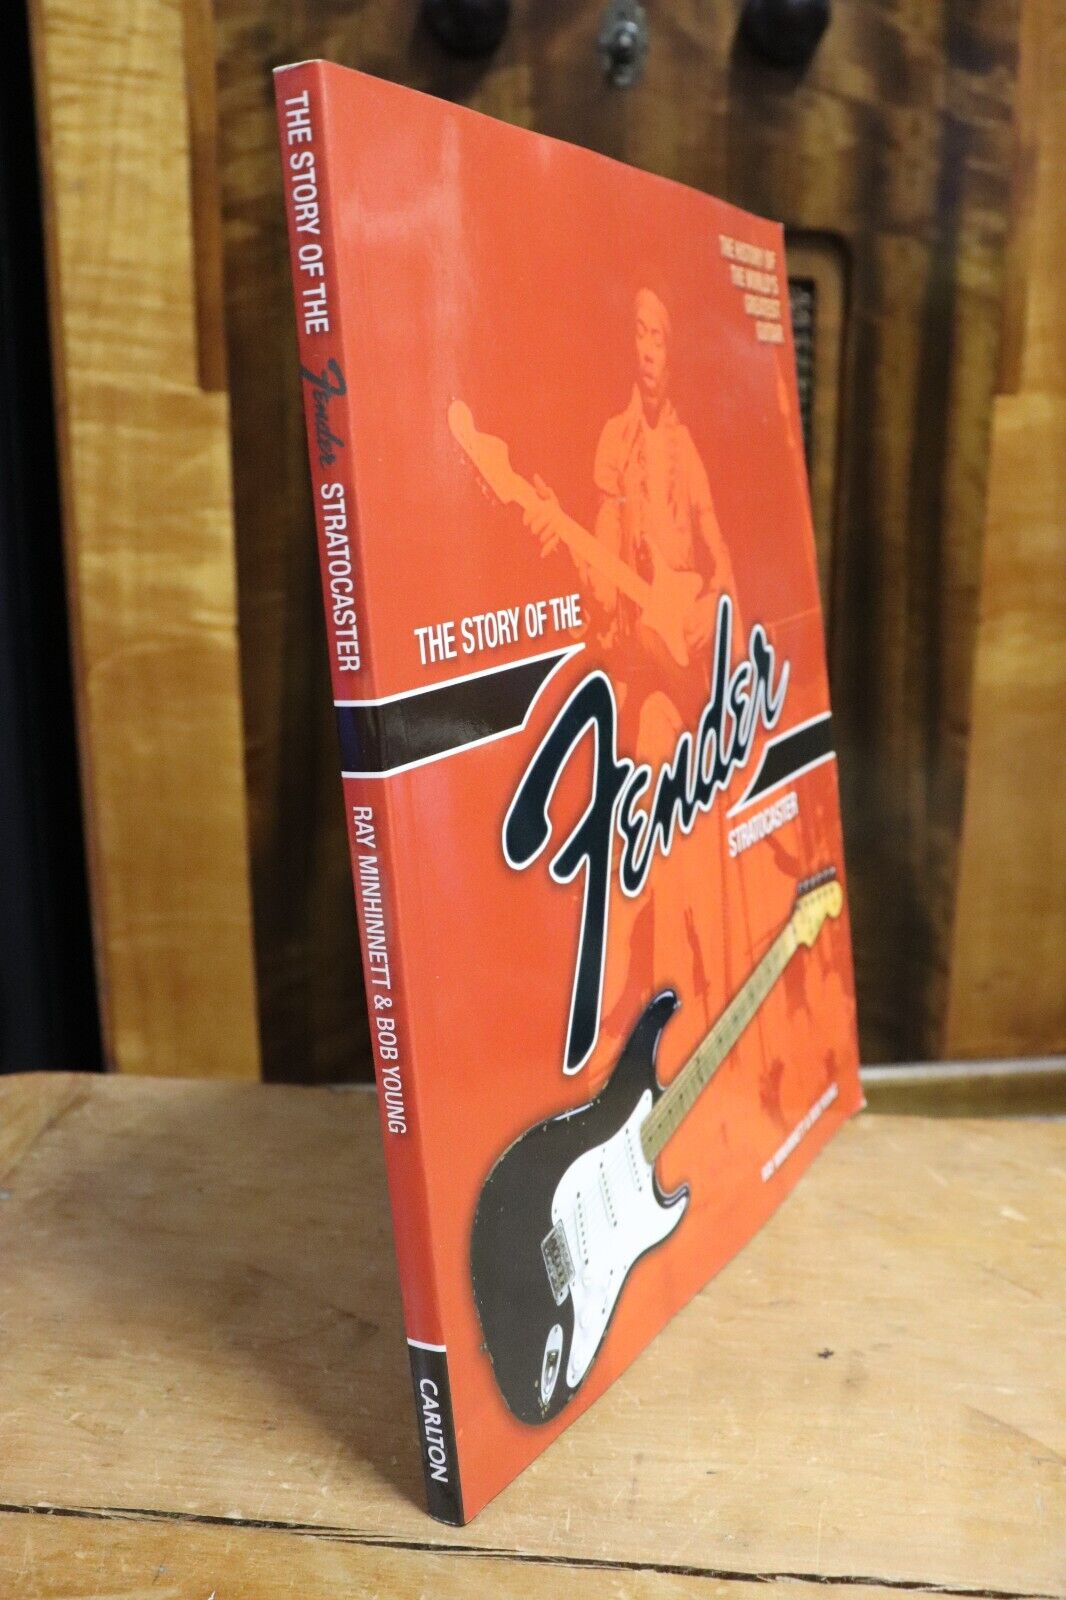 The Story Of The Fender Stratocaster - 2006 - Fender Guitar Reference Book - 0